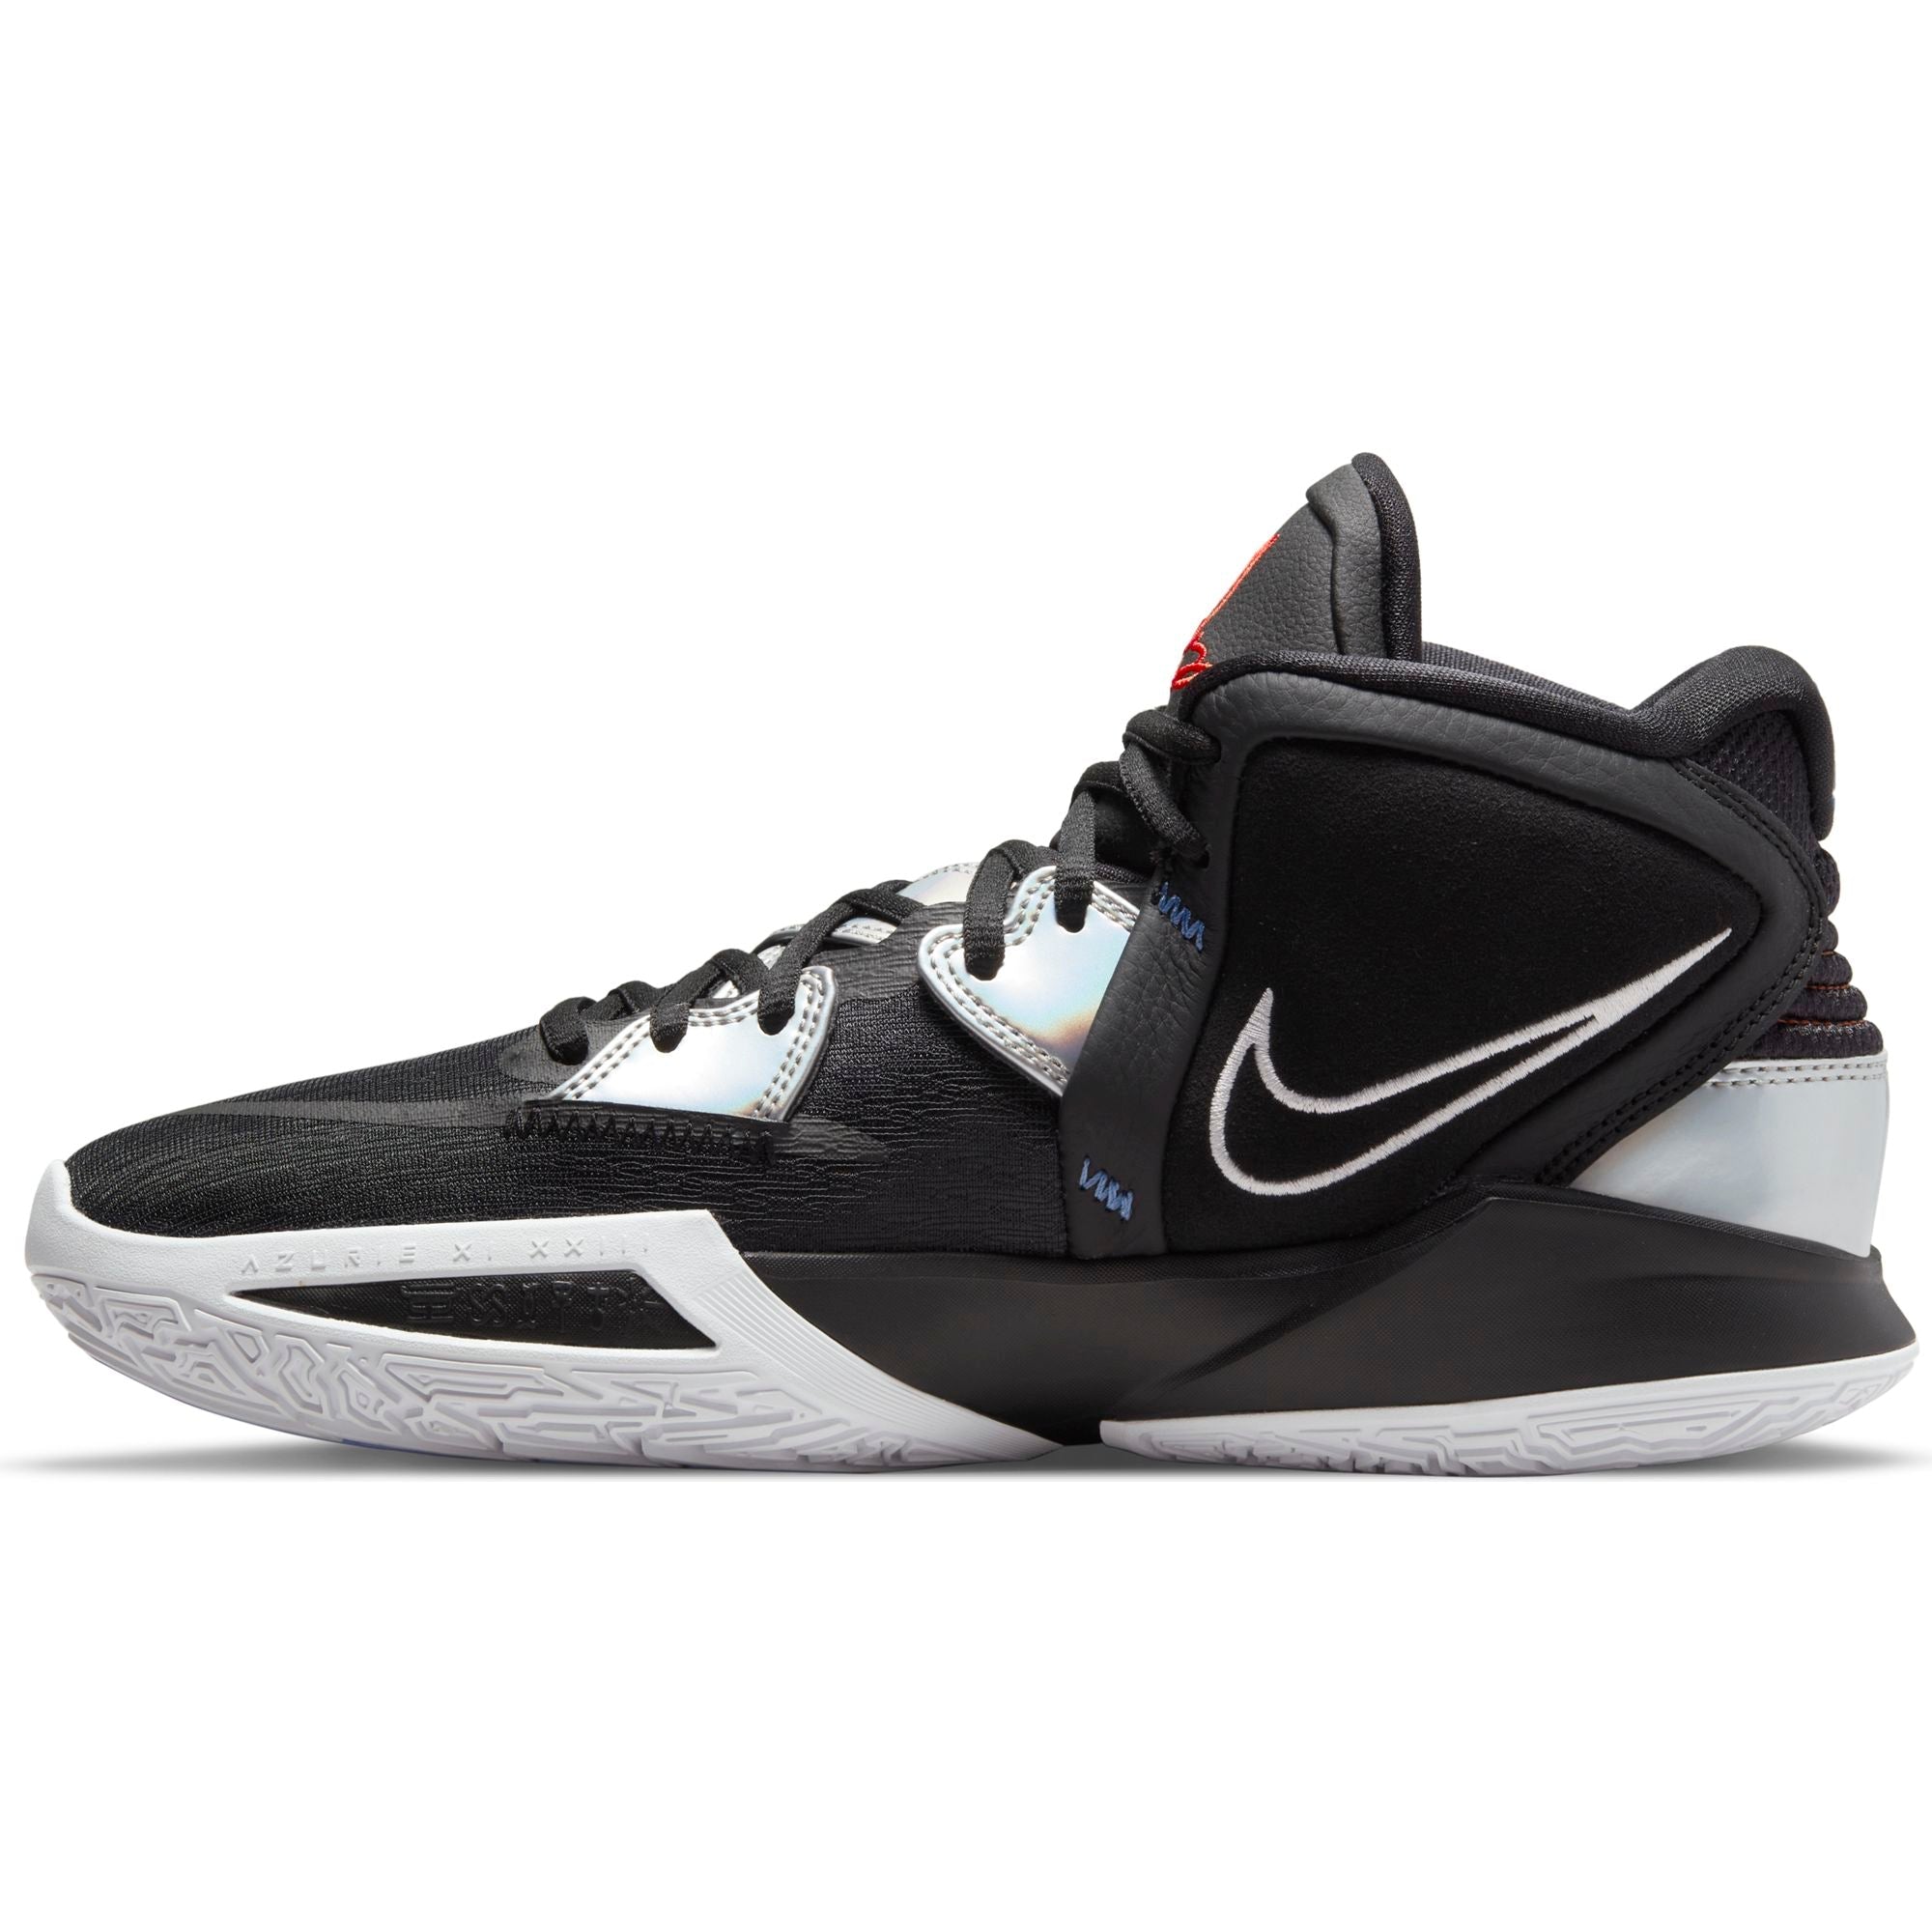 Nike Kyrie 8 Infinity Basketball Boot/Shoe - Black/Multi-Color/White (Cosmetic Flaw)